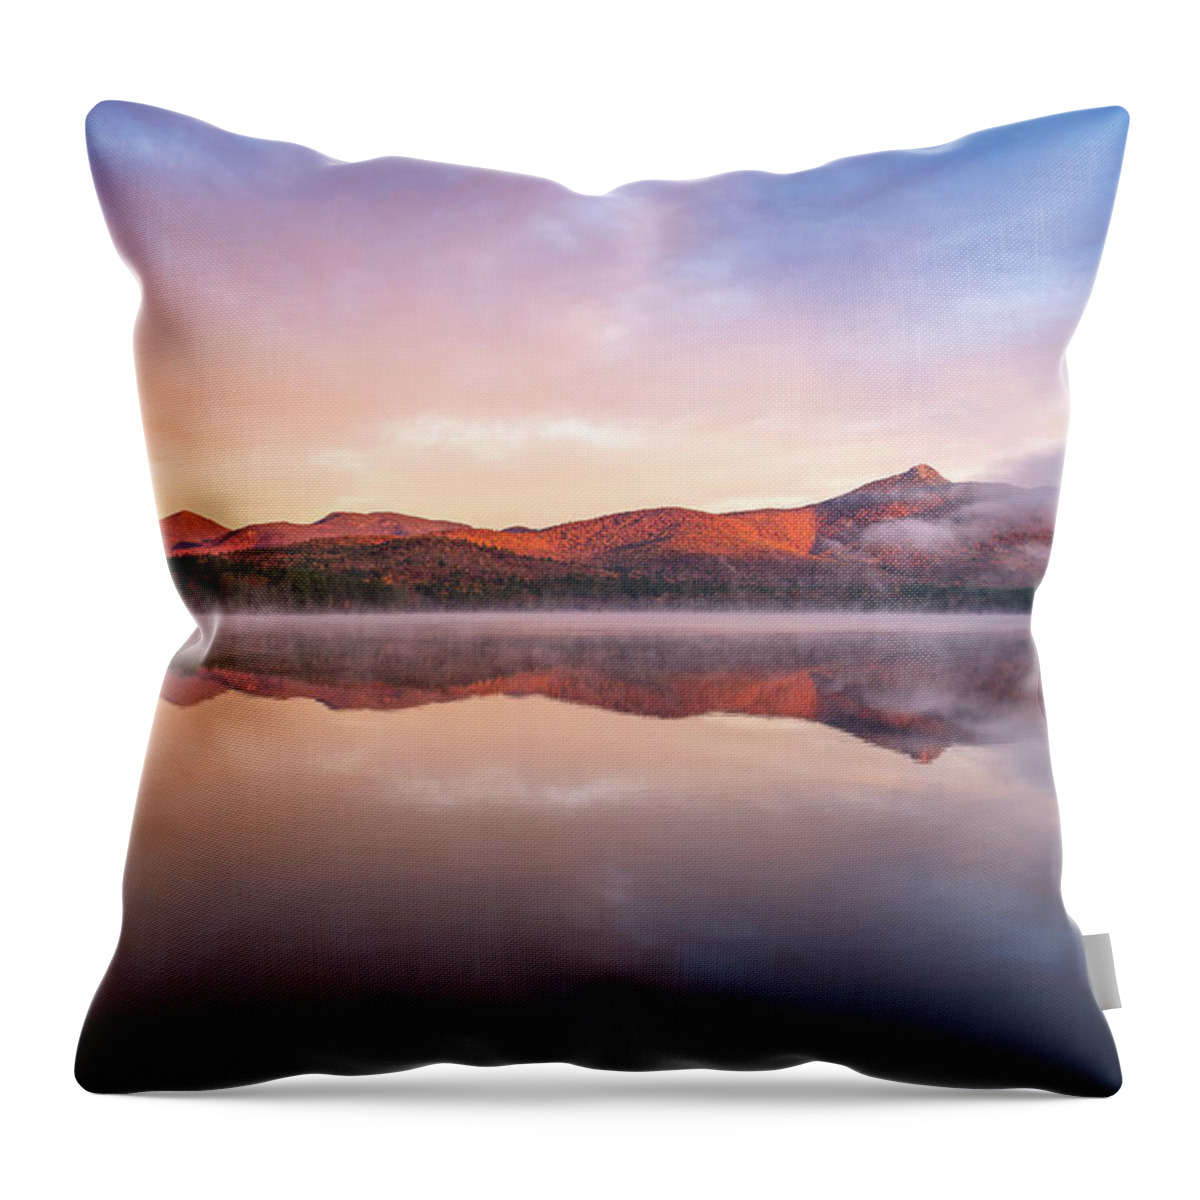 52 With A View Throw Pillow featuring the photograph Mount Chocorua Autumn Mist by Jeff Sinon